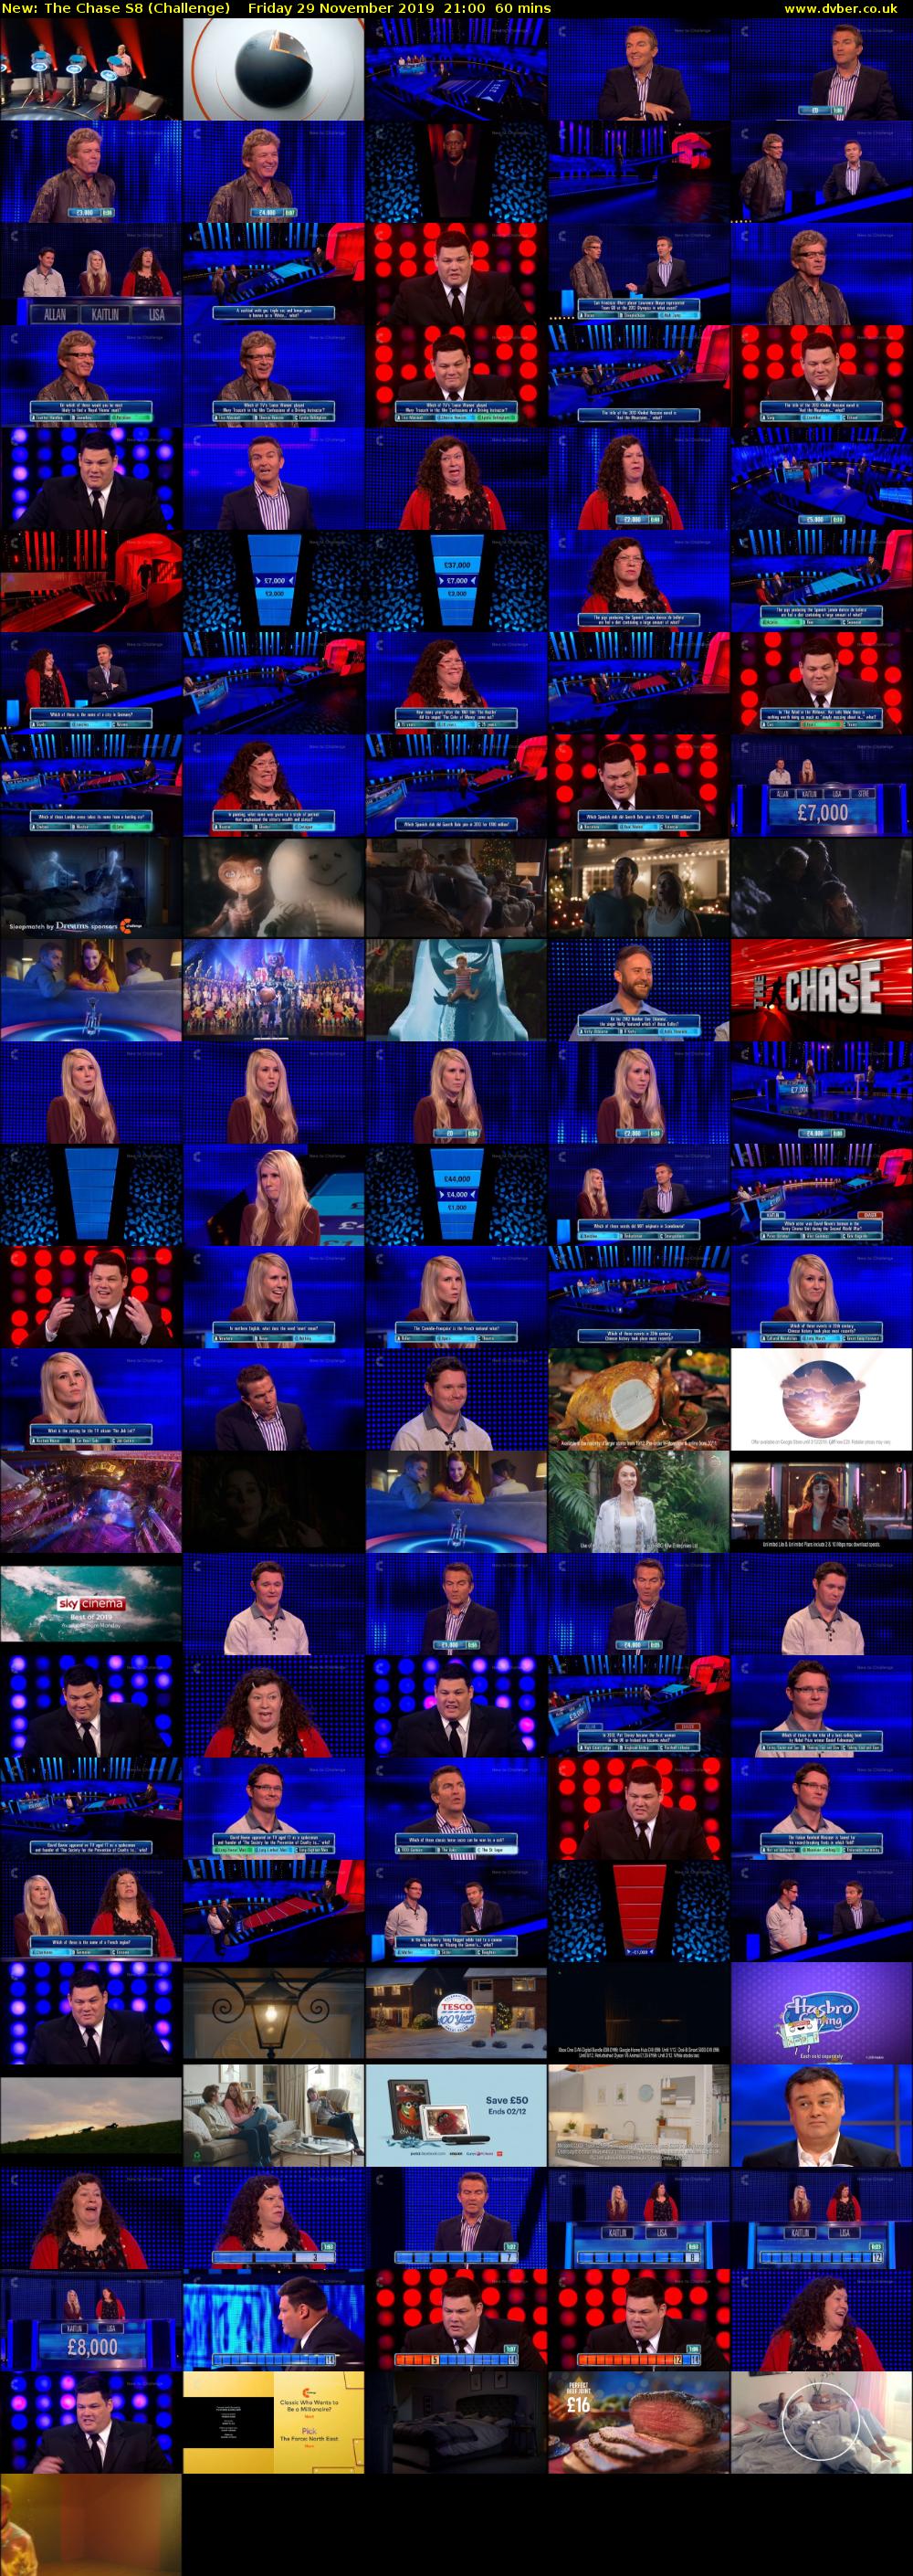 The Chase S8 (Challenge) Friday 29 November 2019 21:00 - 22:00